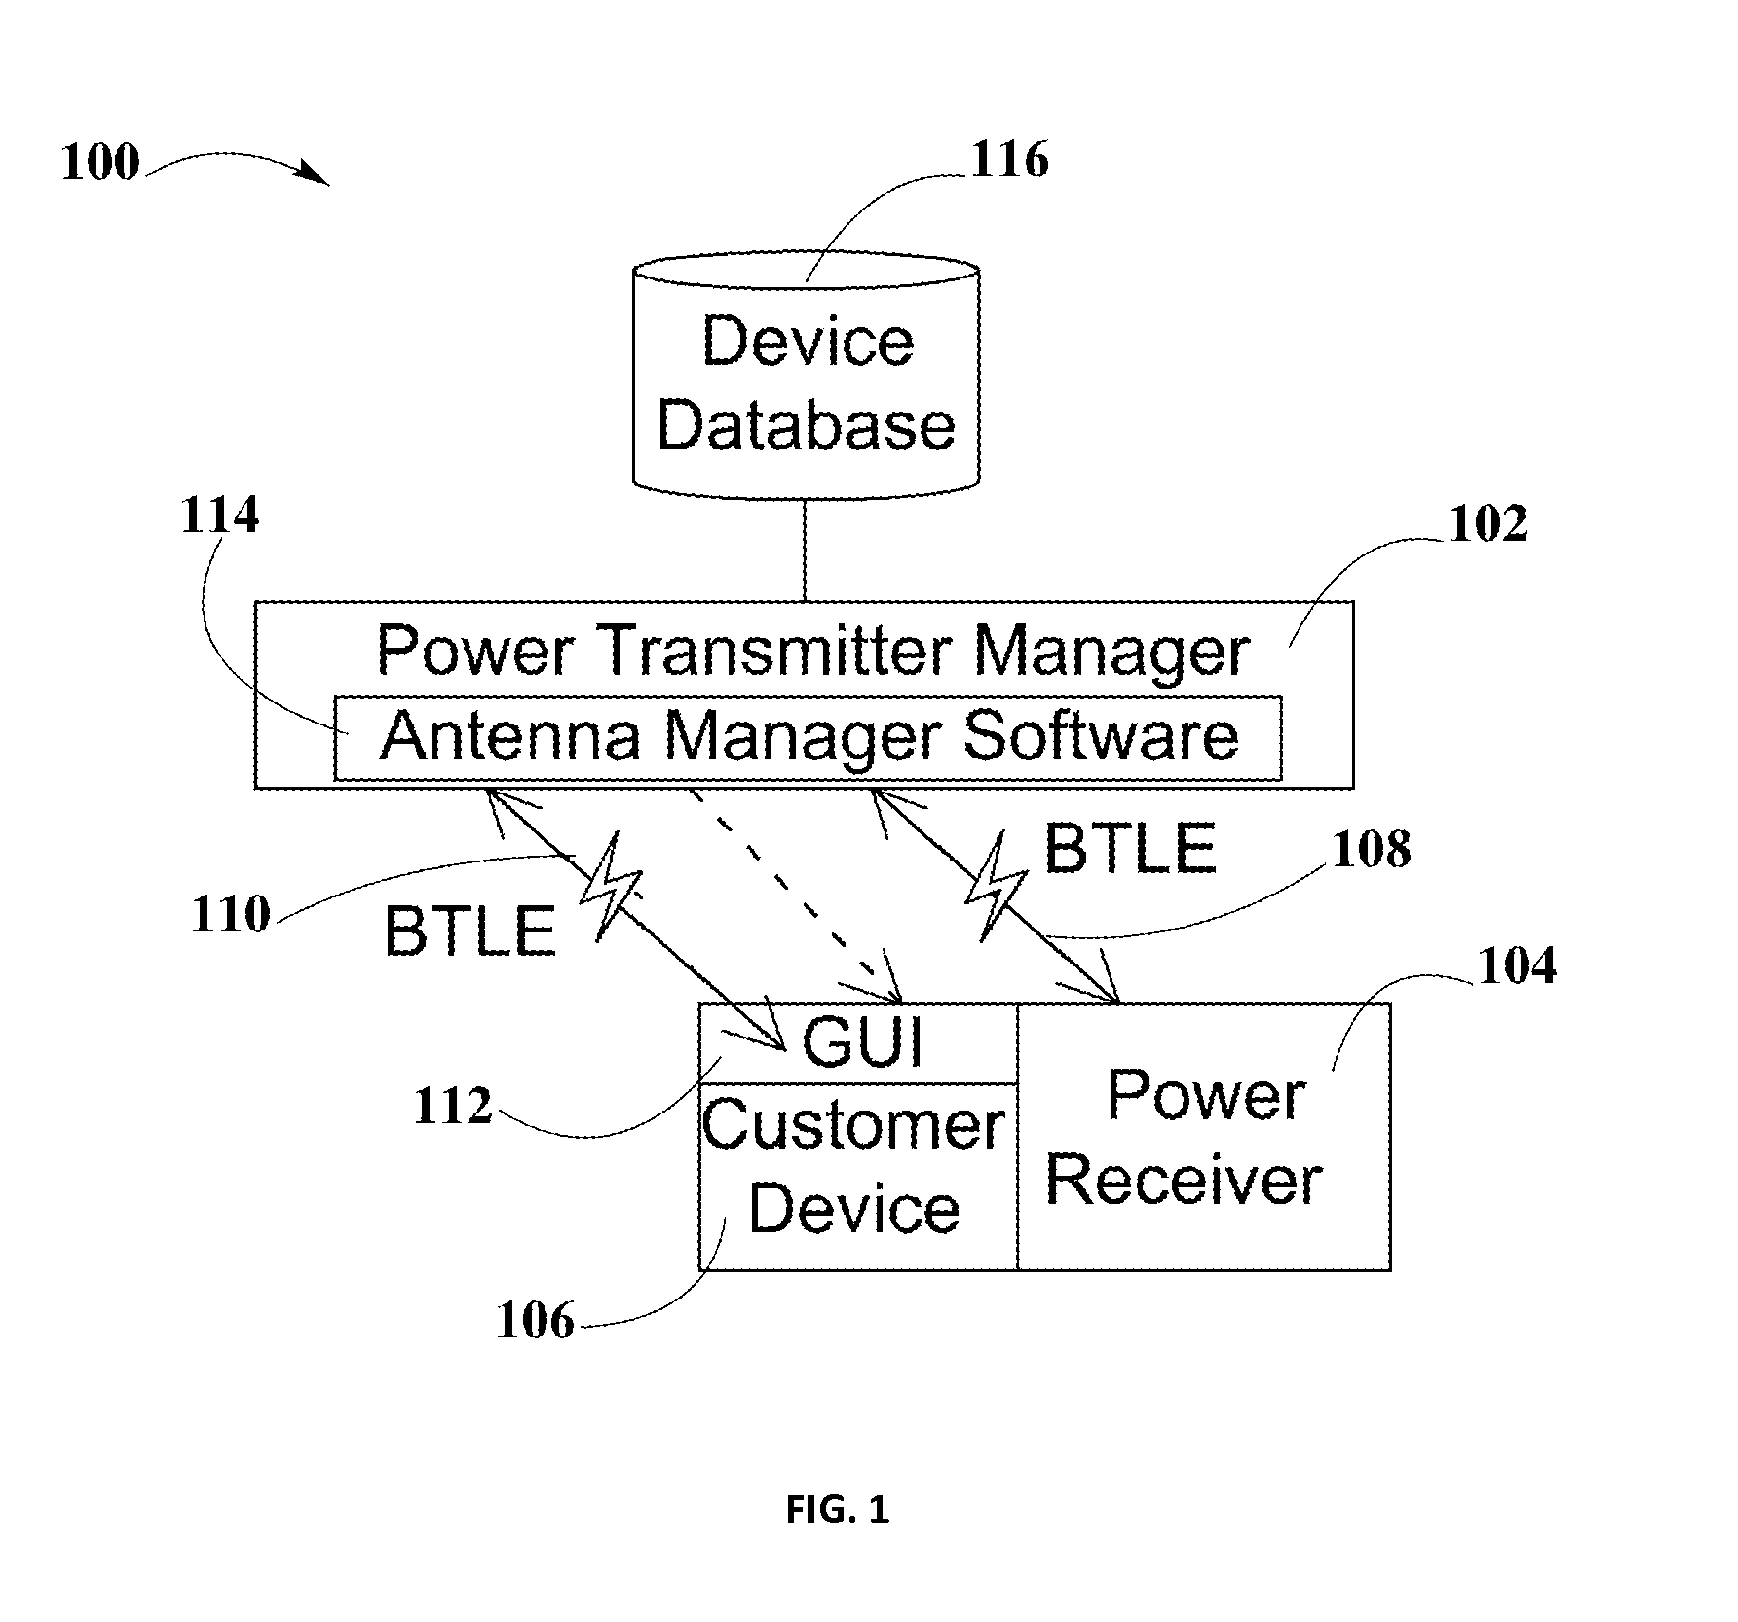 System and Method for a Self-system Analysis in a Wireless Power Transmission Network